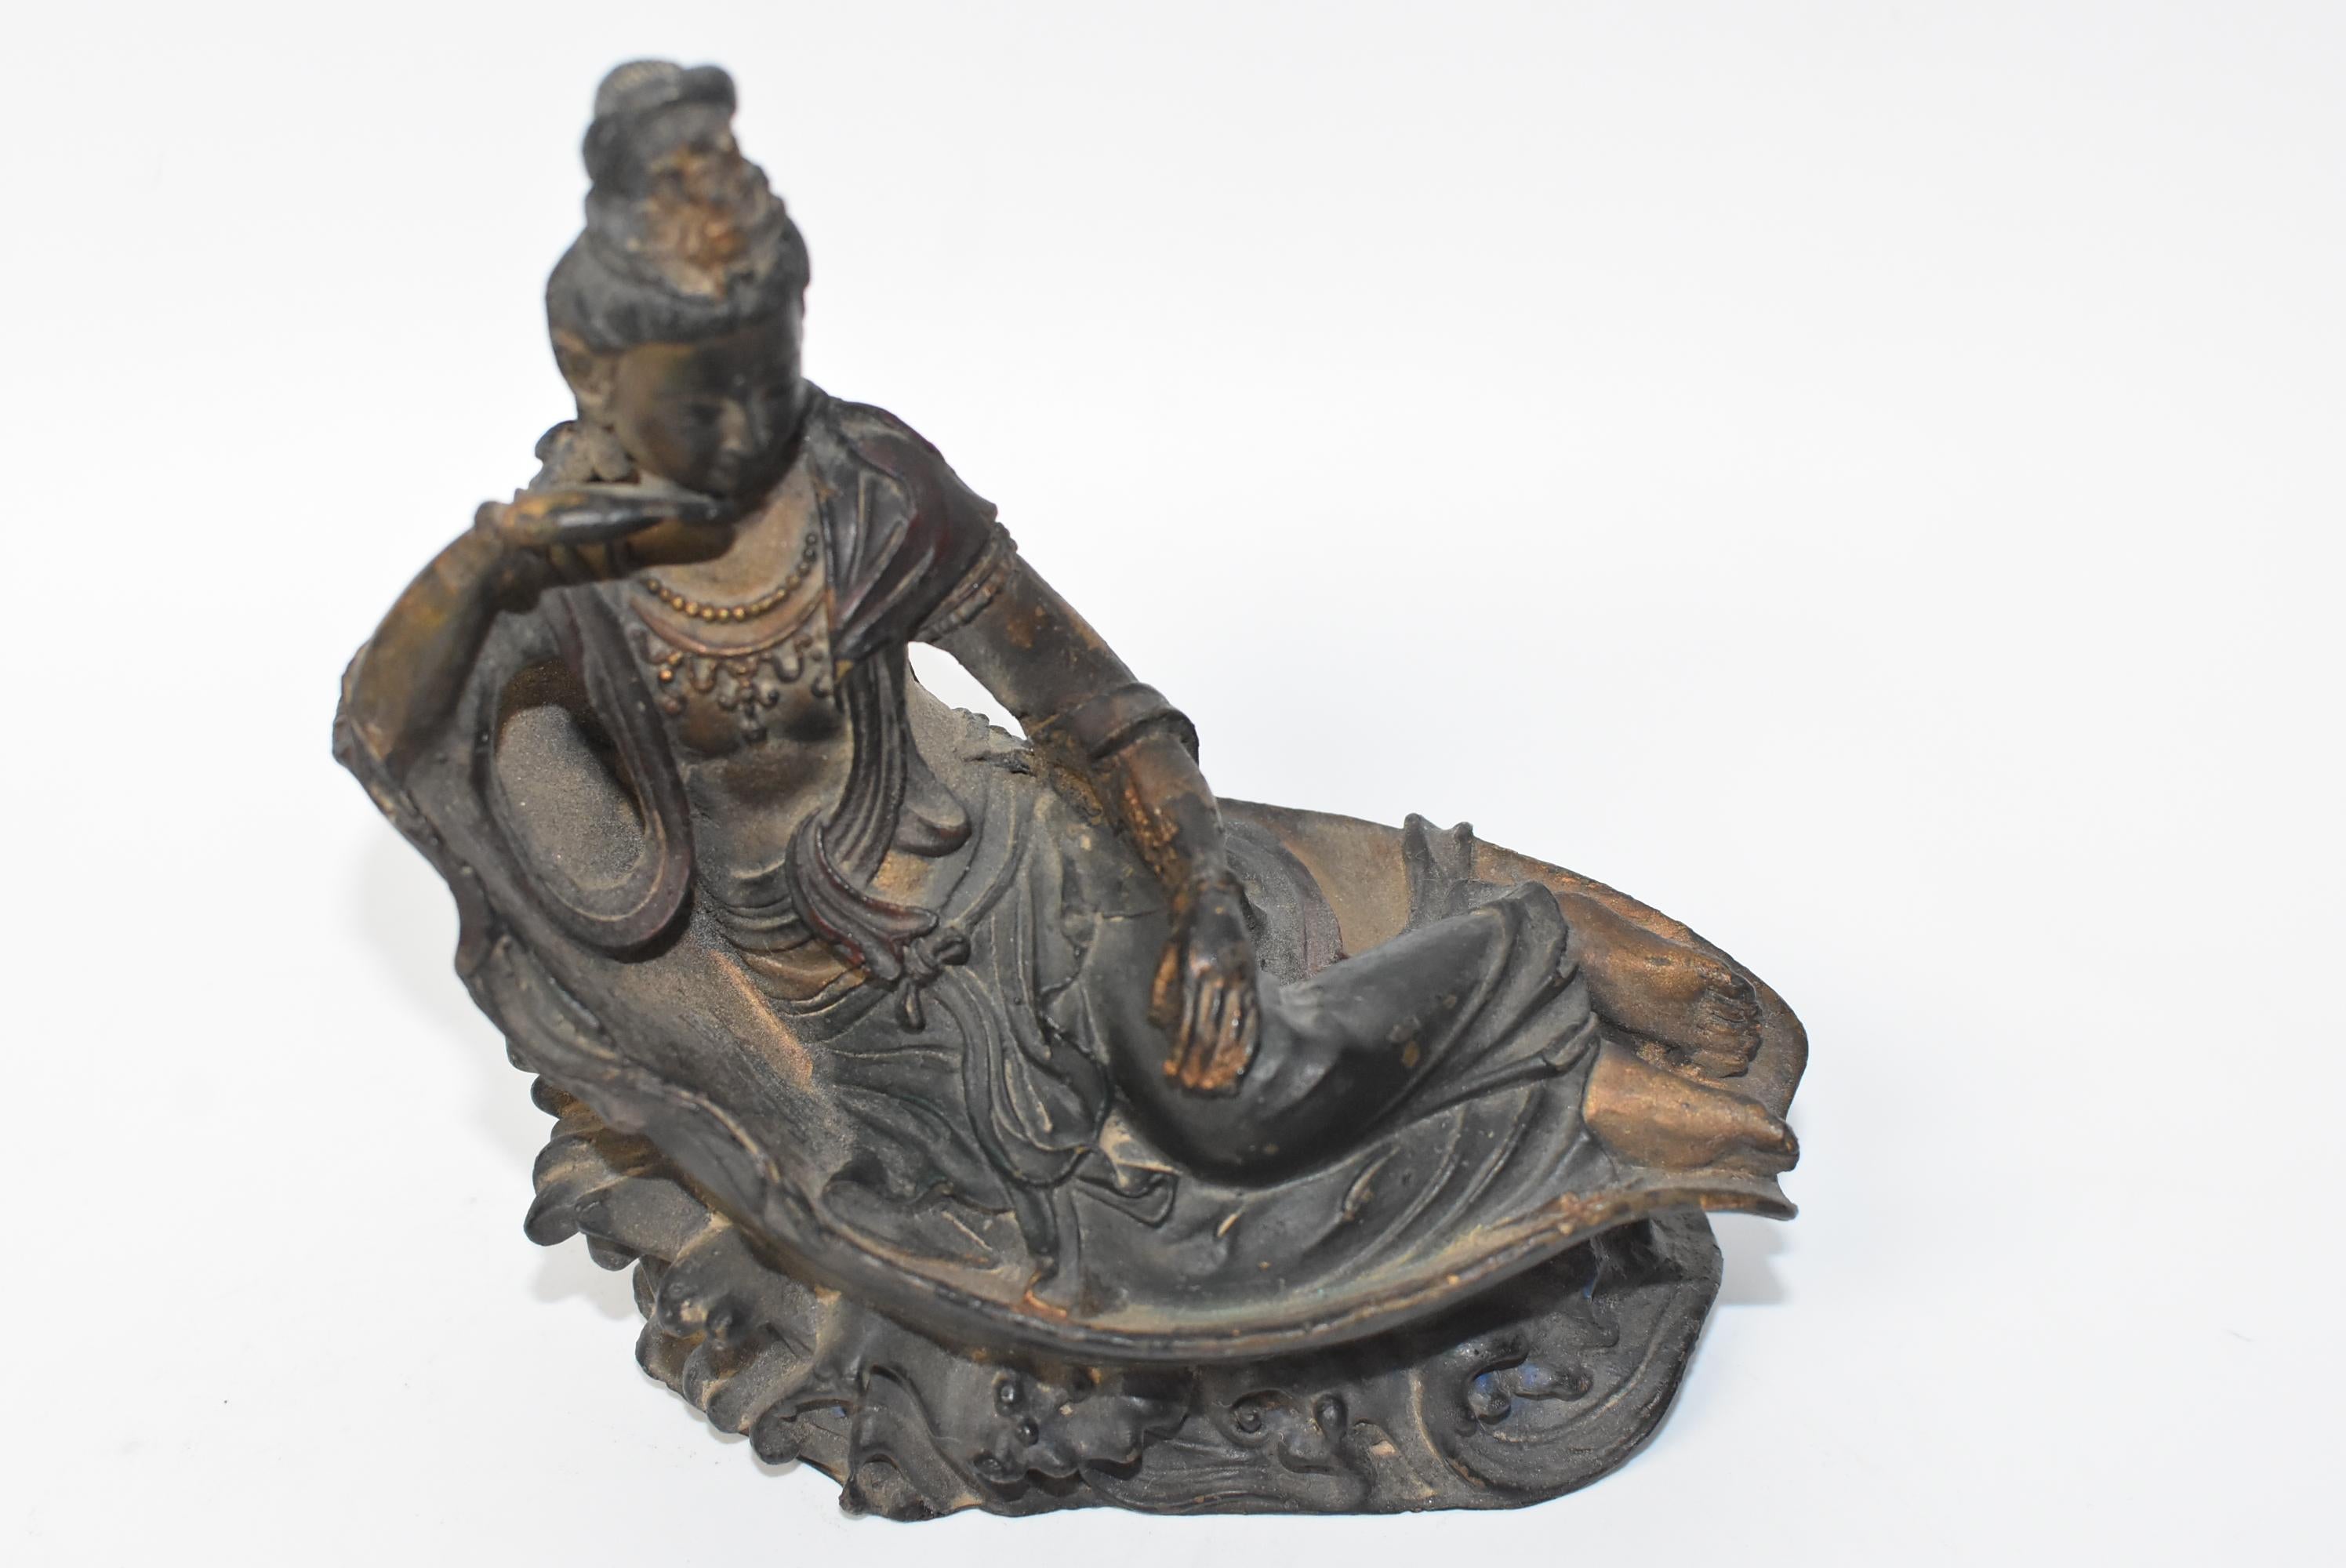 A small, fine example of the beautiful antique reclining Kwan Yin, one of the 4-piece collection we recently acquired. Kwan Yin is reclining on a lotus petal, perched on water waves. Her robe is fluid and soft. She wears a necklace and wears her